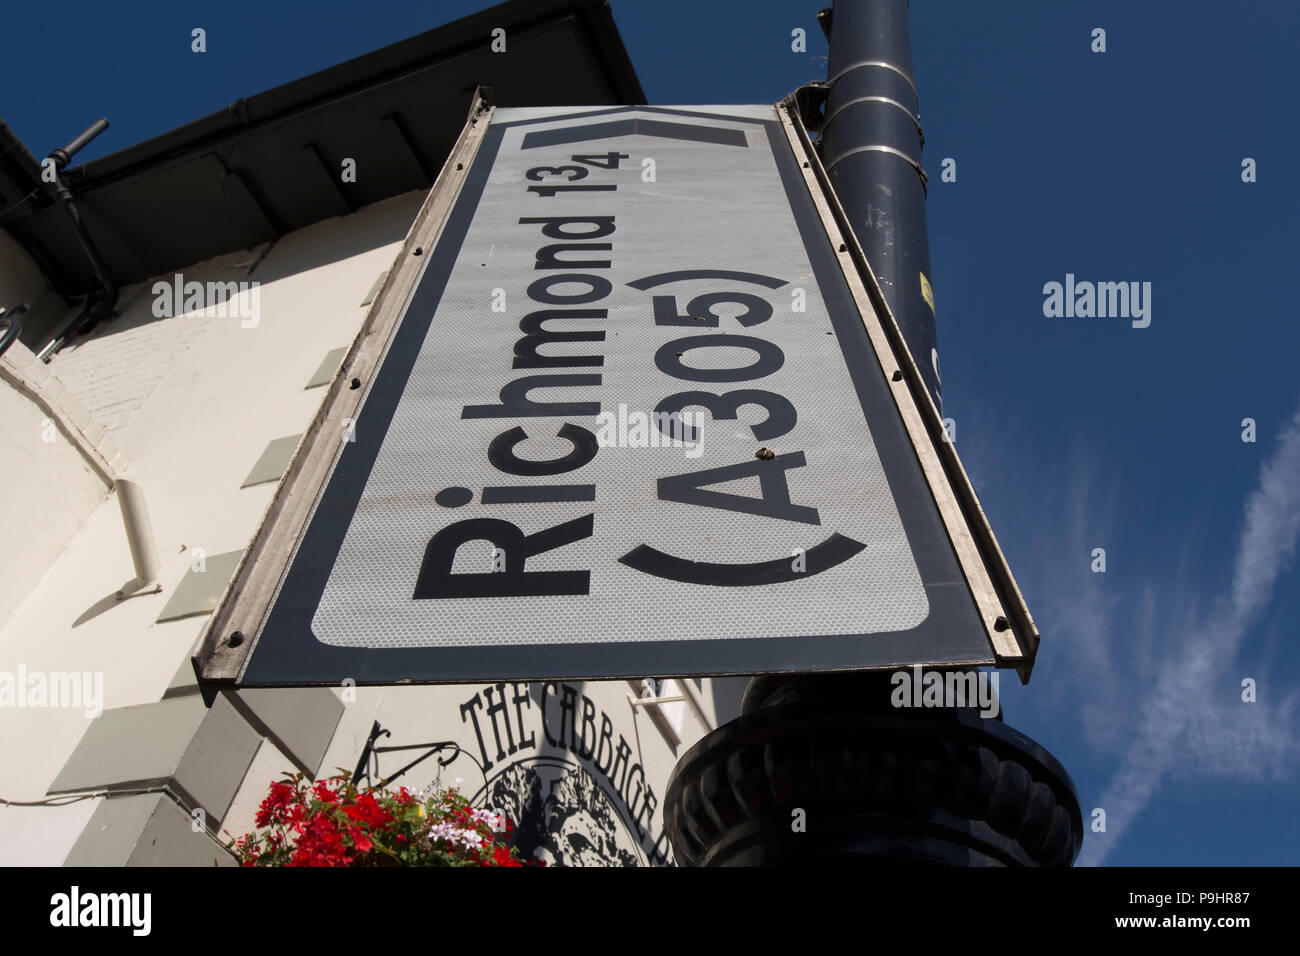 misplaced road sign giving directions for richmond and the A305 road, in twickenham, middlesex, england Stock Photo